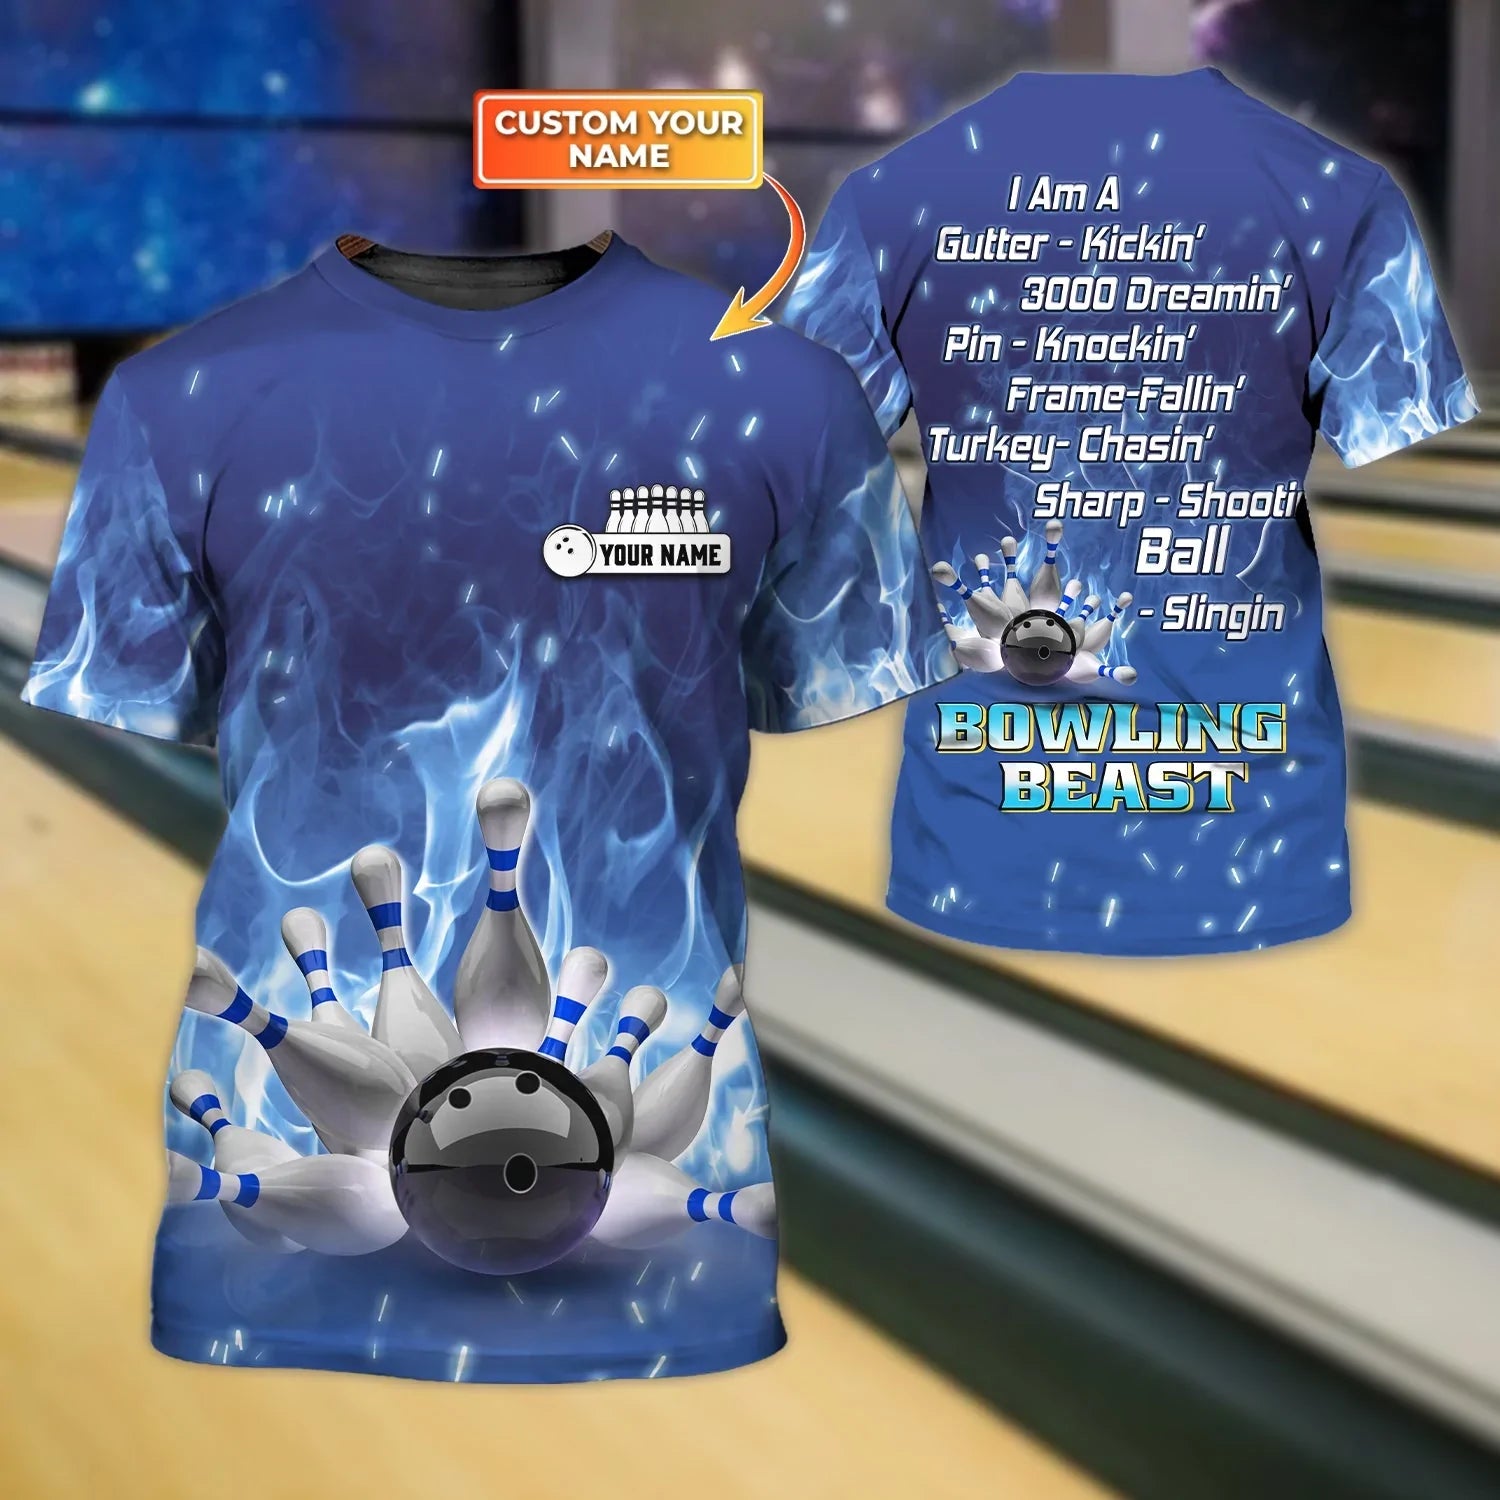 Bowling Shirts for Enthusiasts: Customized 3D All-Over Printed Tshirt as a Gift – BT004